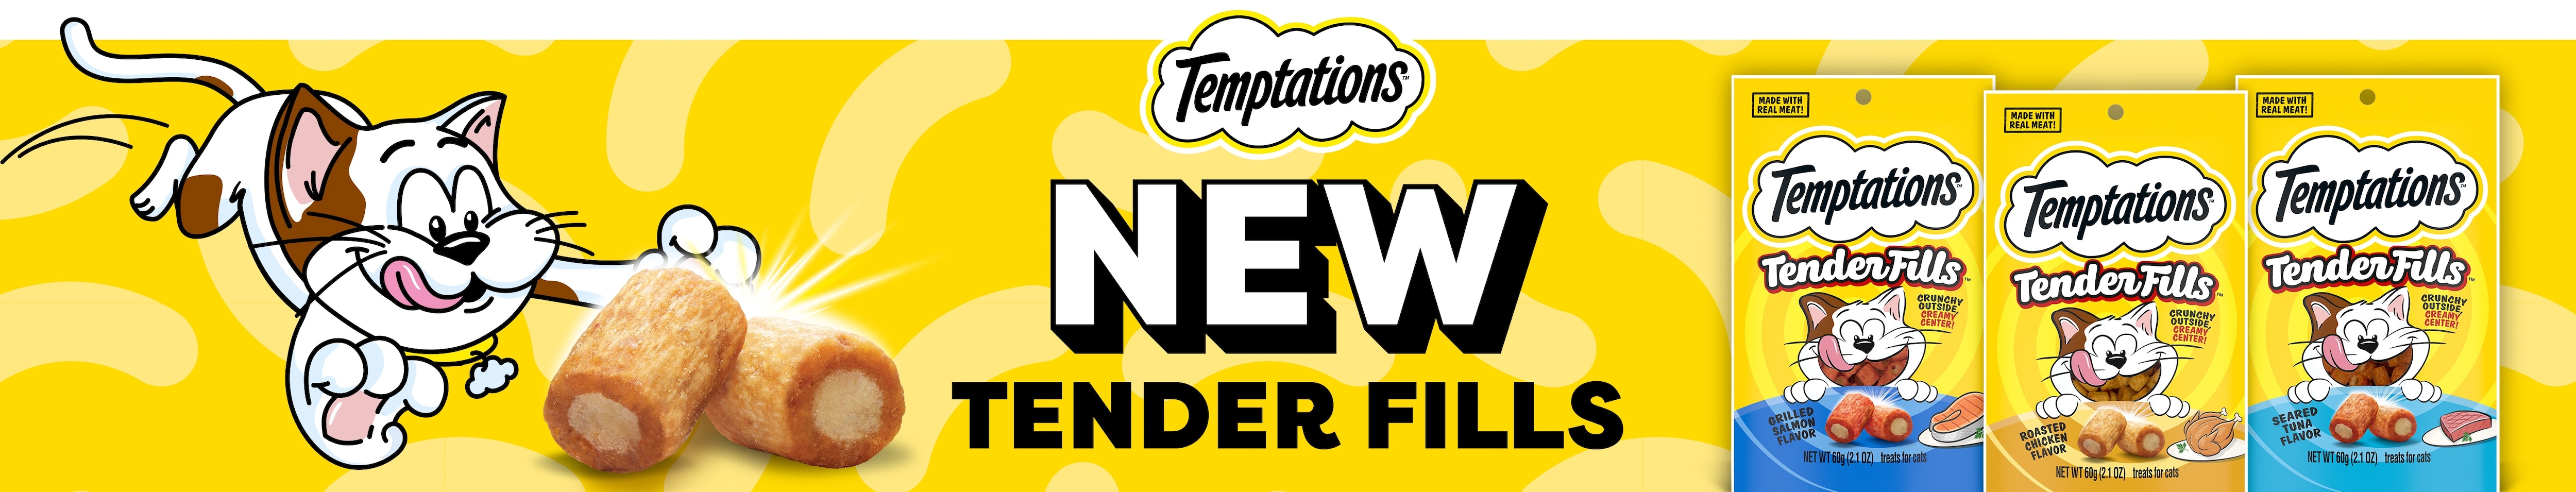 TEMPTATIONS Tender Fills Roasted Chicken Flavor Soft & Crunchy Cat Treats,  11.6-oz pouch - Chewy.com